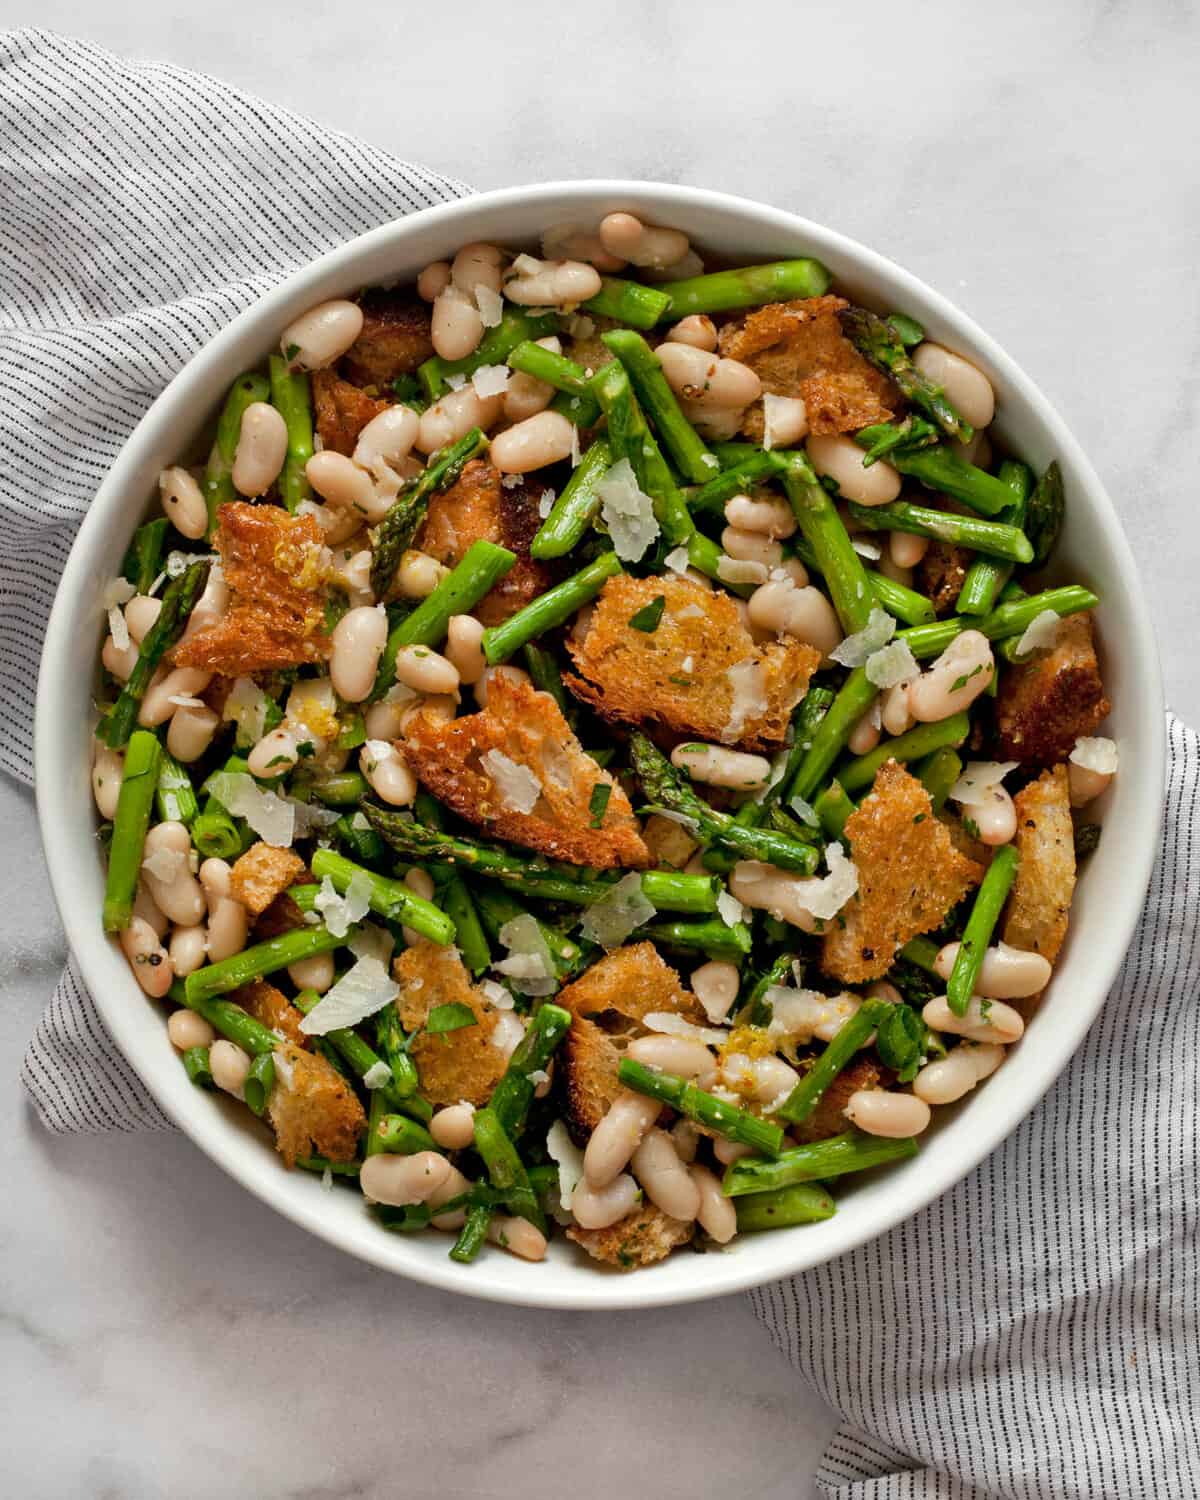 Asparagus salad with cannellini beans and croutons in a bowl.